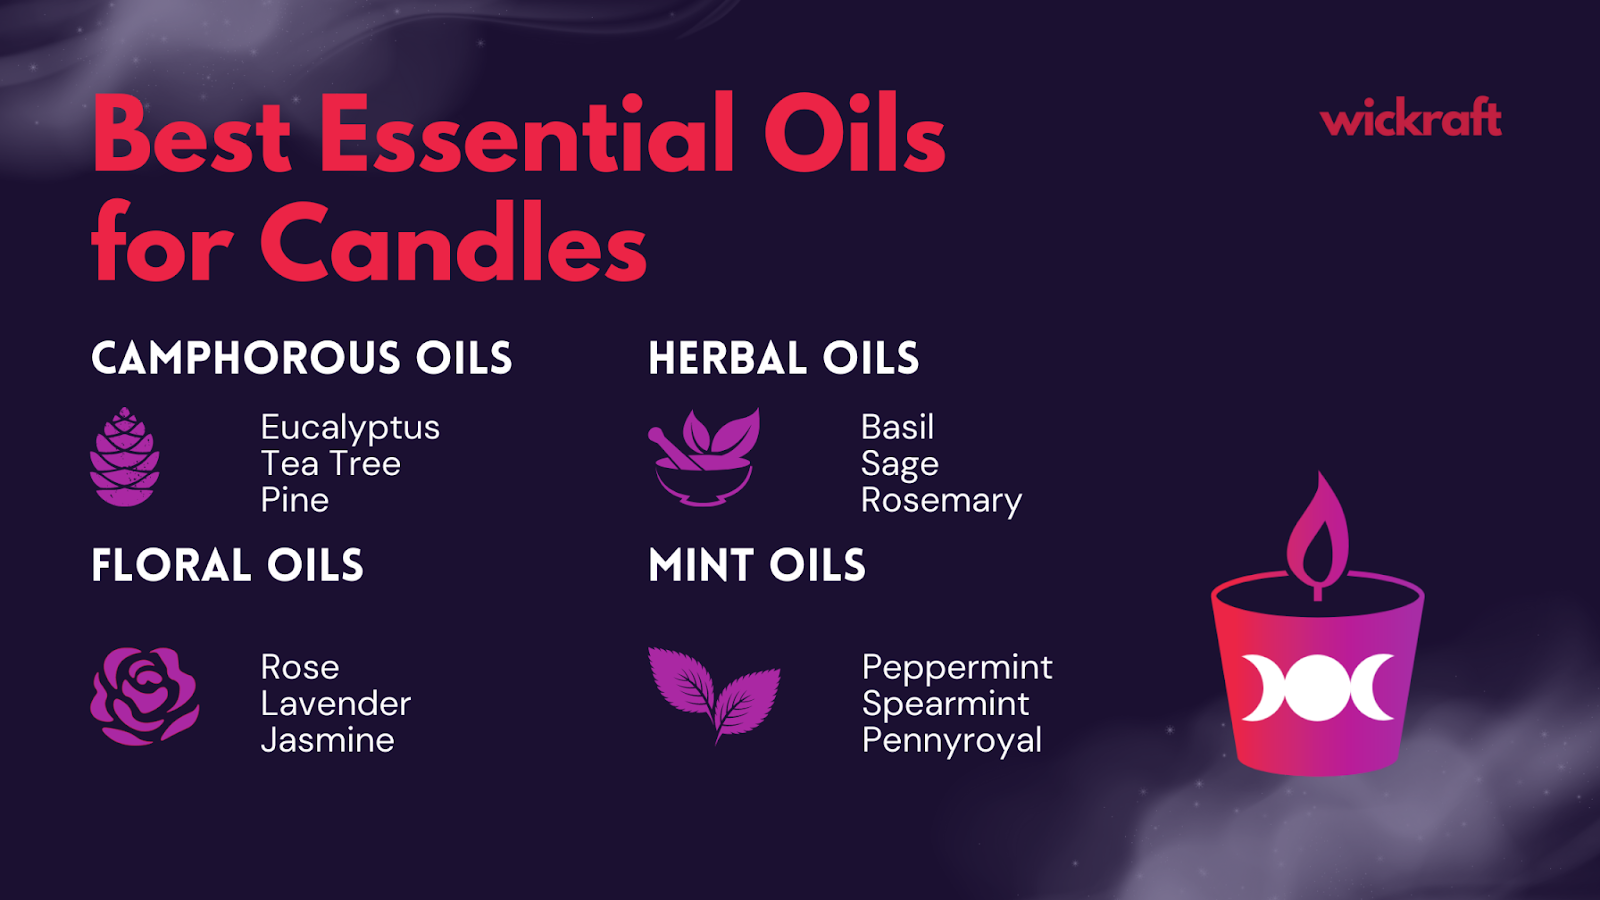 What are the Best Essential Oils for Candle Making?